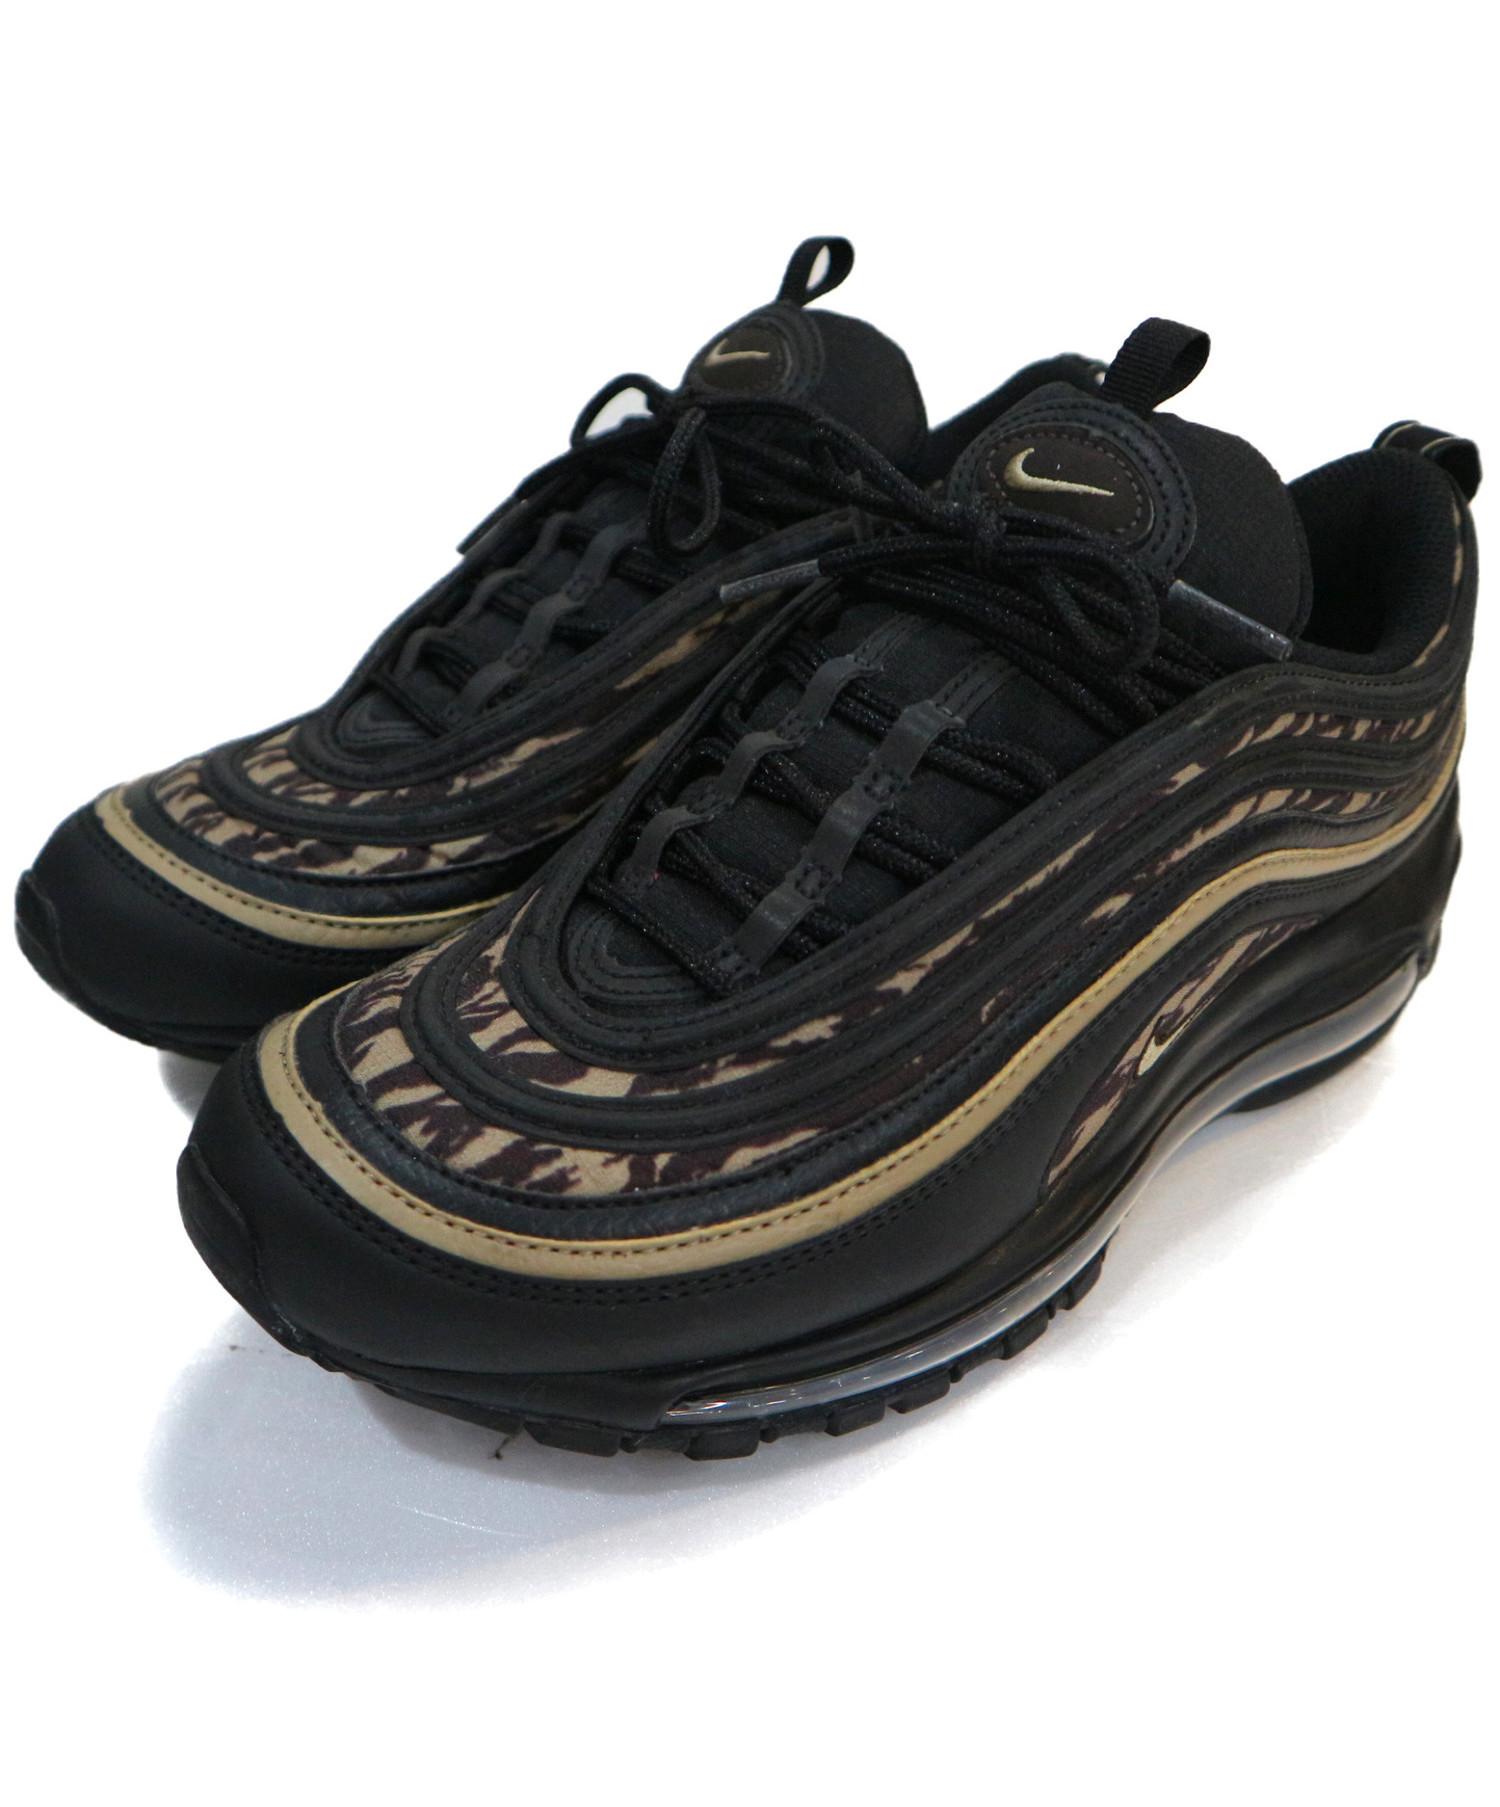 Discount Nike Air Max 97 Ultra Rose Gold Trainers For Sale Online